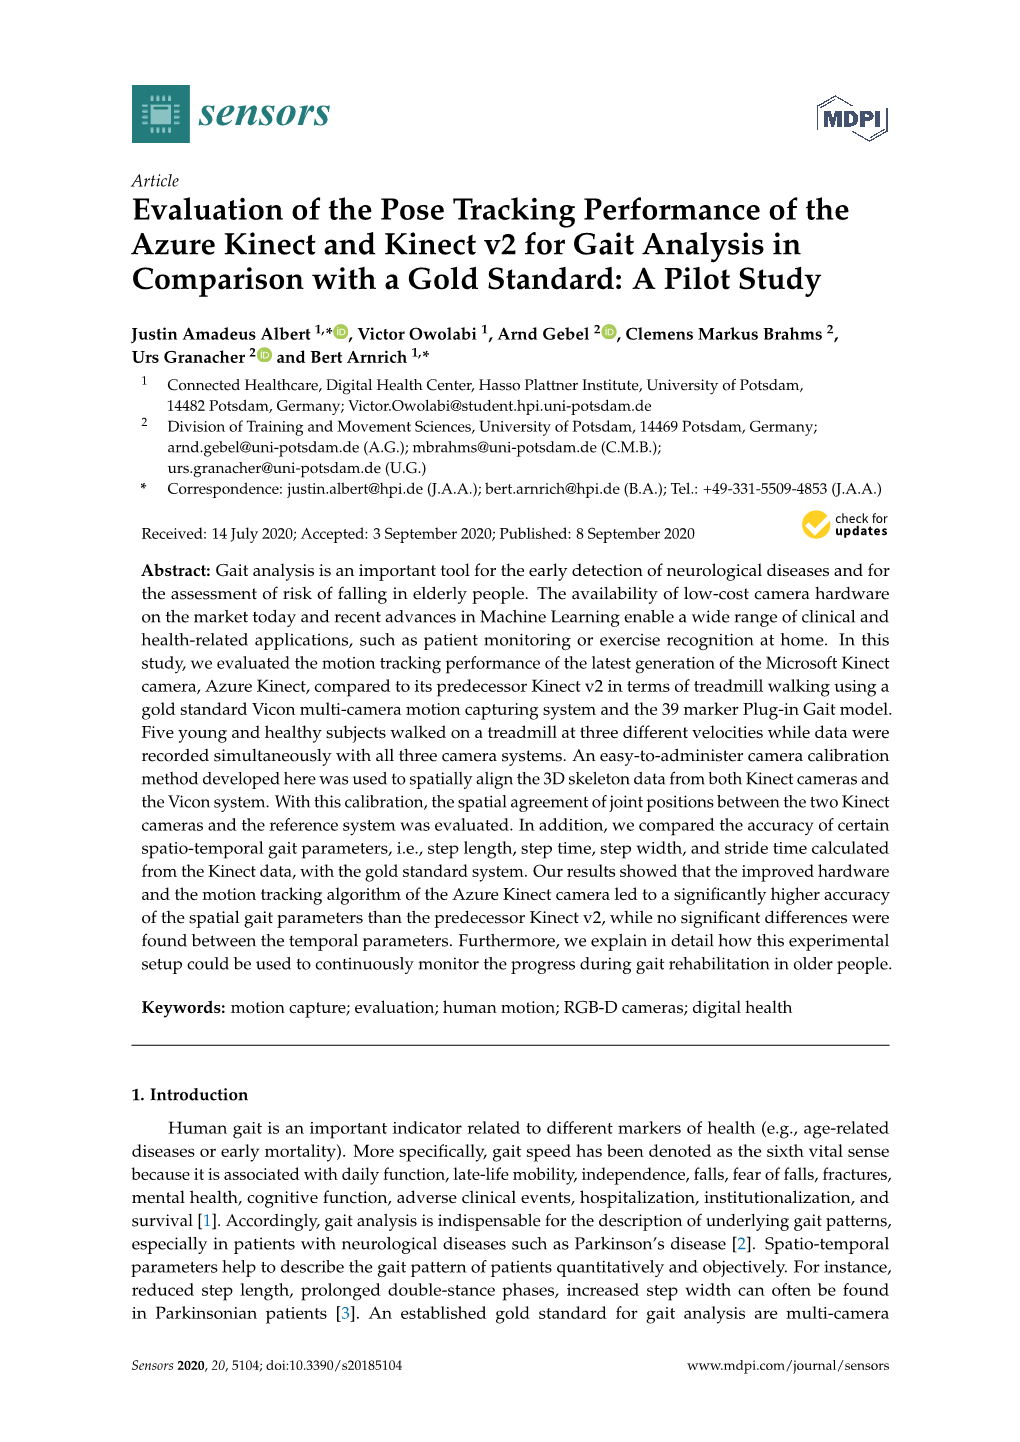 Evaluation of the Pose Tracking Performance of the Azure Kinect and Kinect V2 for Gait Analysis in Comparison with a Gold Standard: a Pilot Study